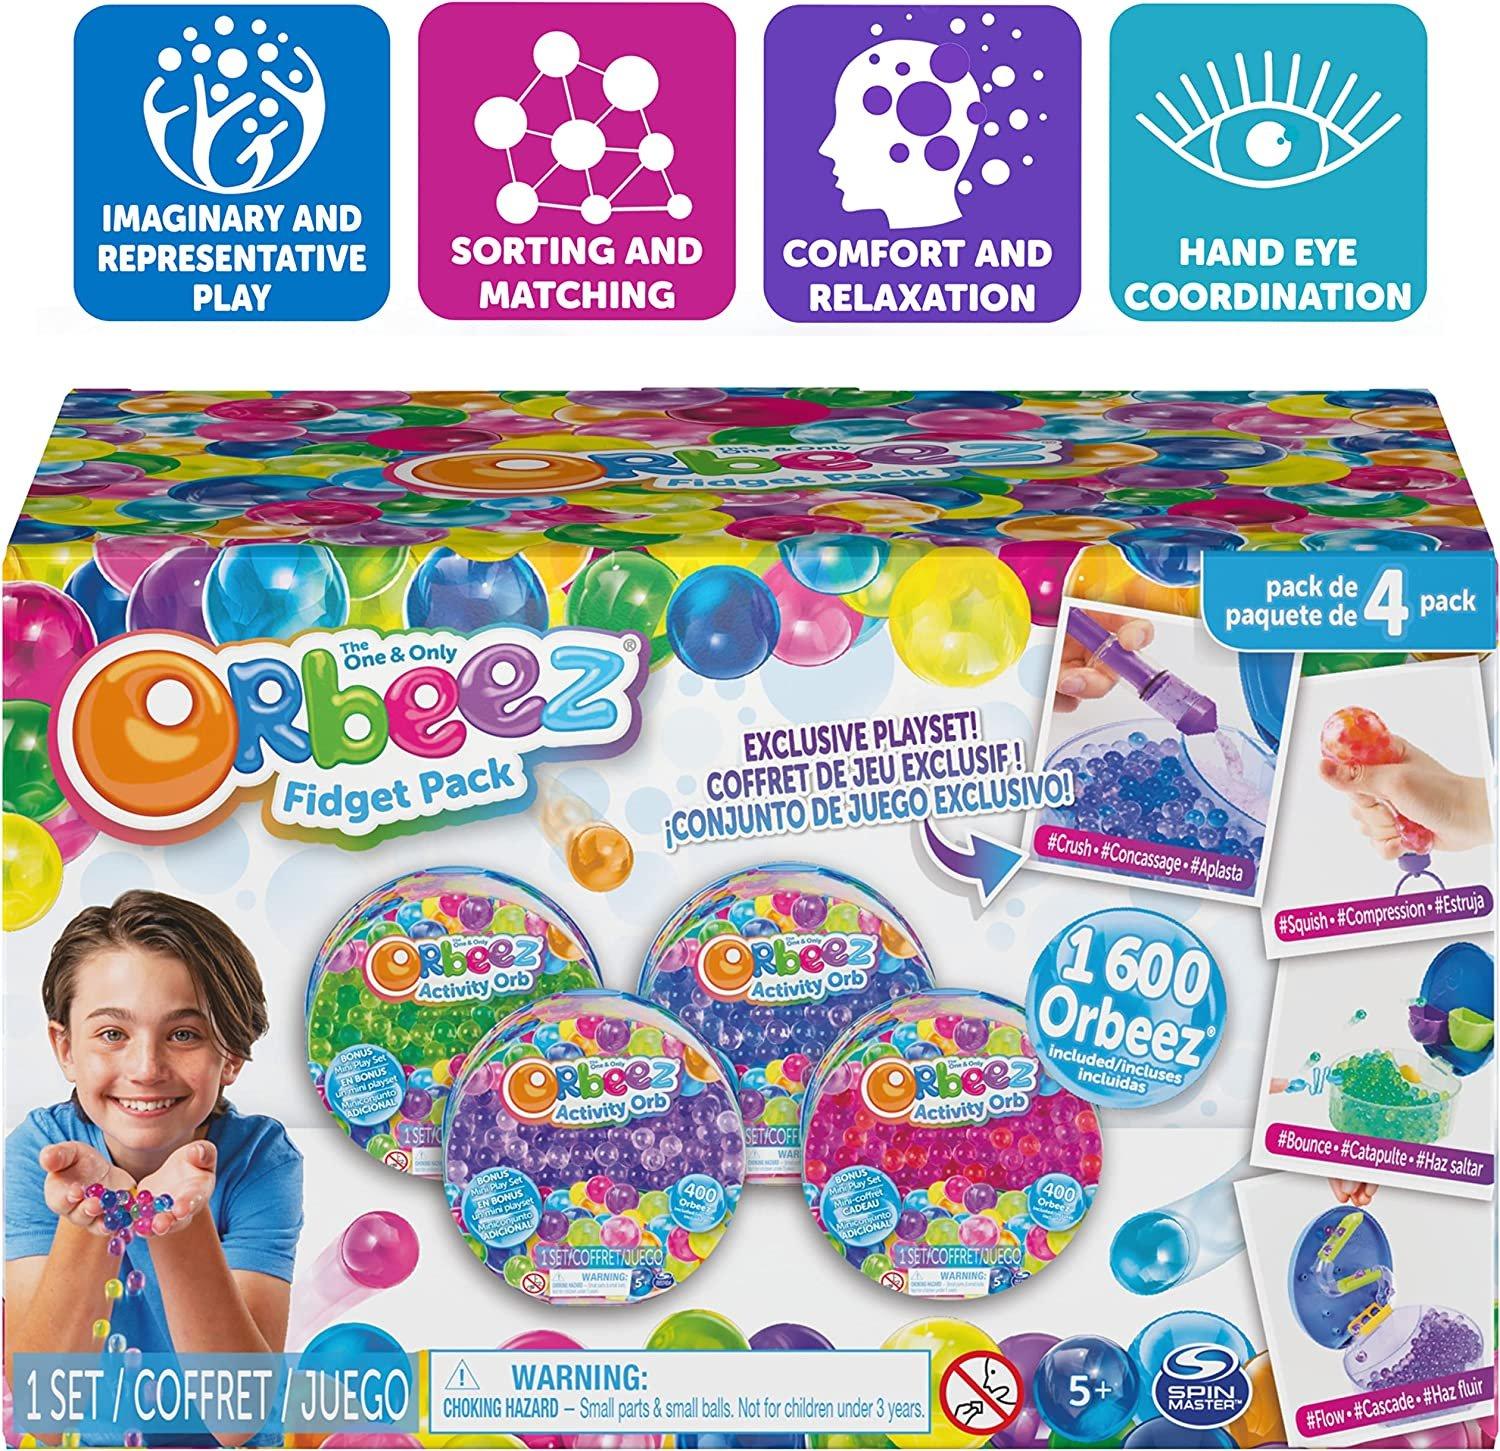 Arts and Crafts Supplies for Kids - 1600+Pcs Craft Kits for Kids